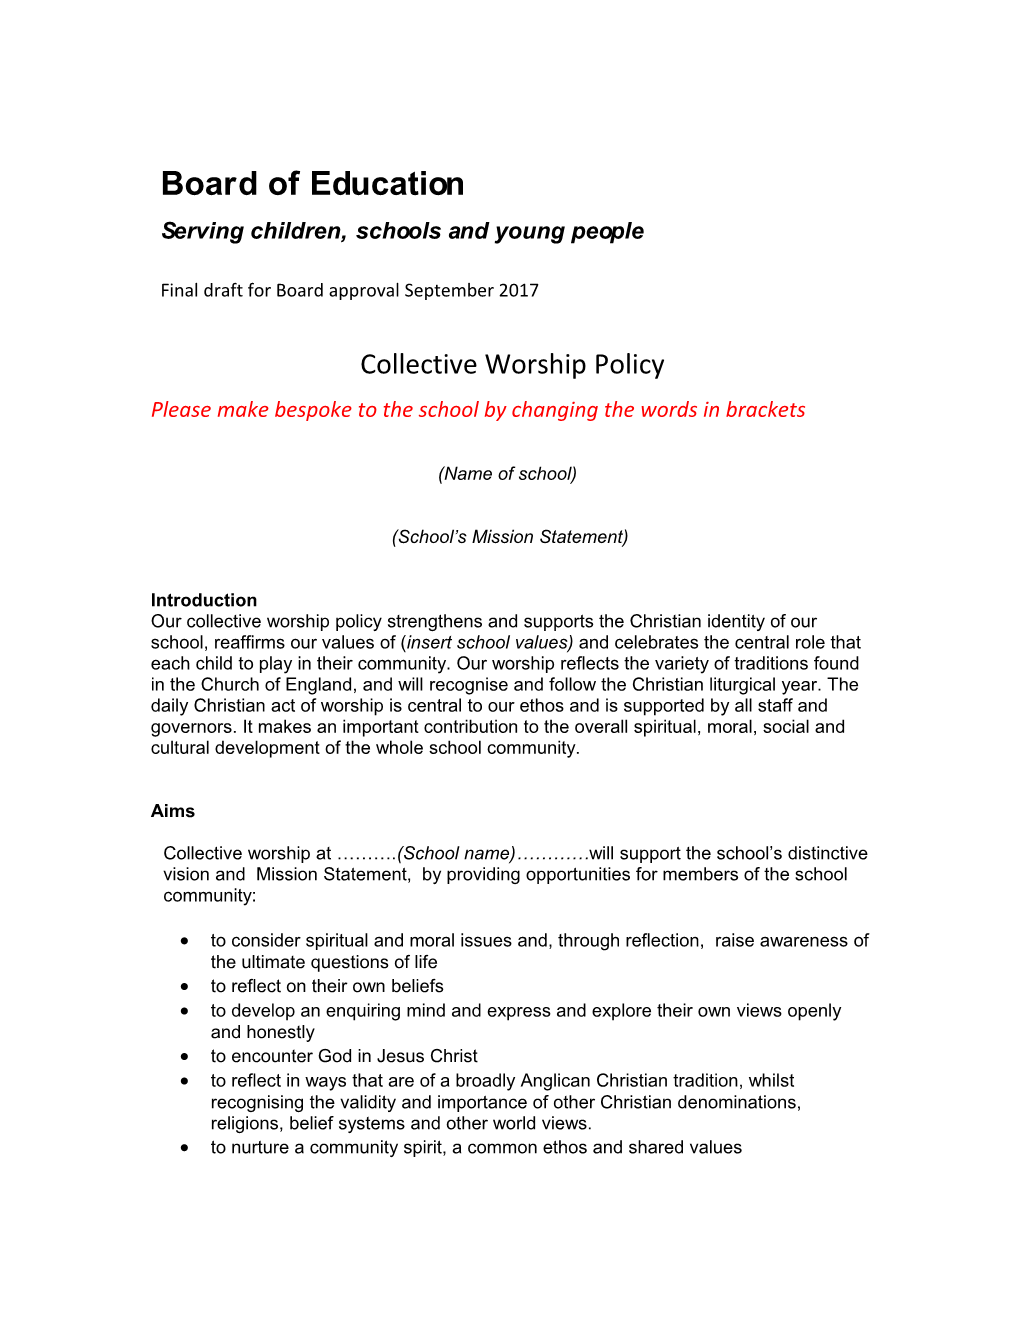 Collective Worship Policy for a Primary School